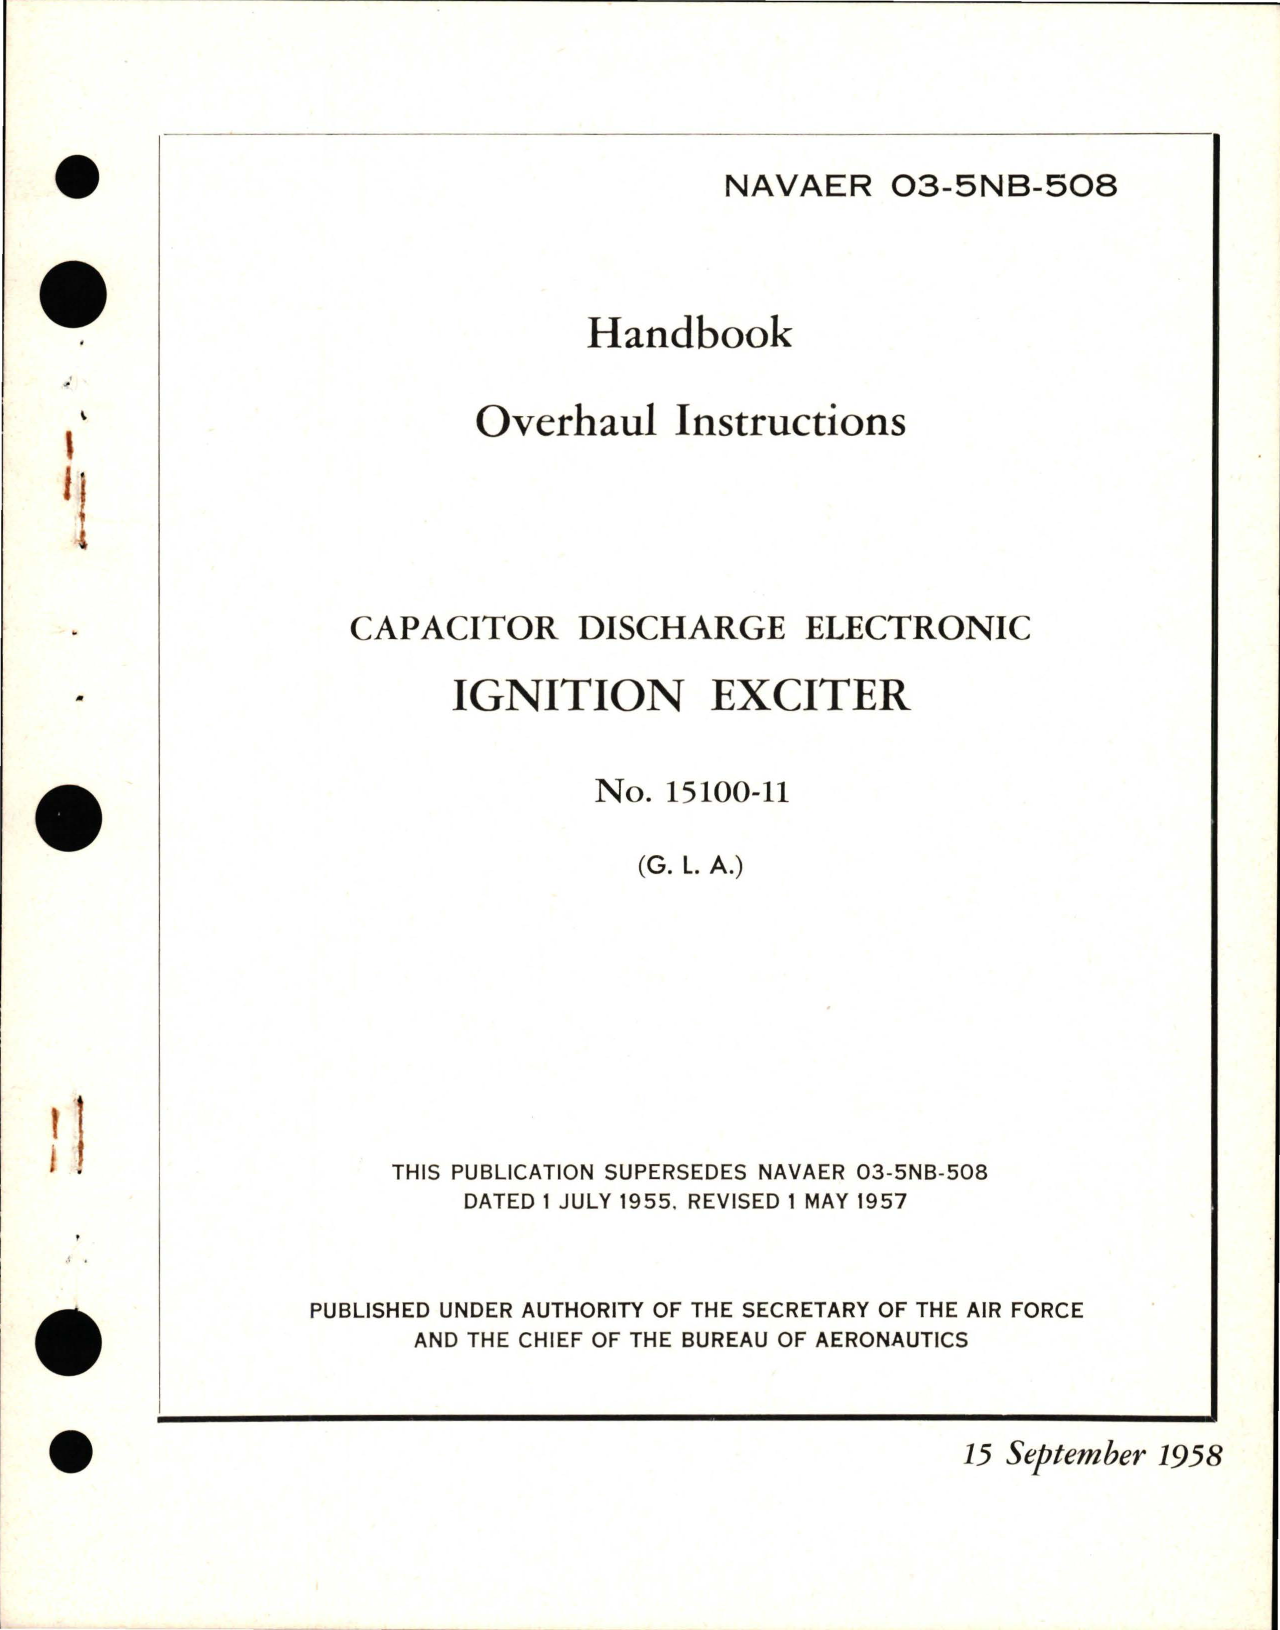 Sample page 1 from AirCorps Library document: Overhaul Instructions for Capacitor Discharge Electronic Ignition Exciter - No 15100-11